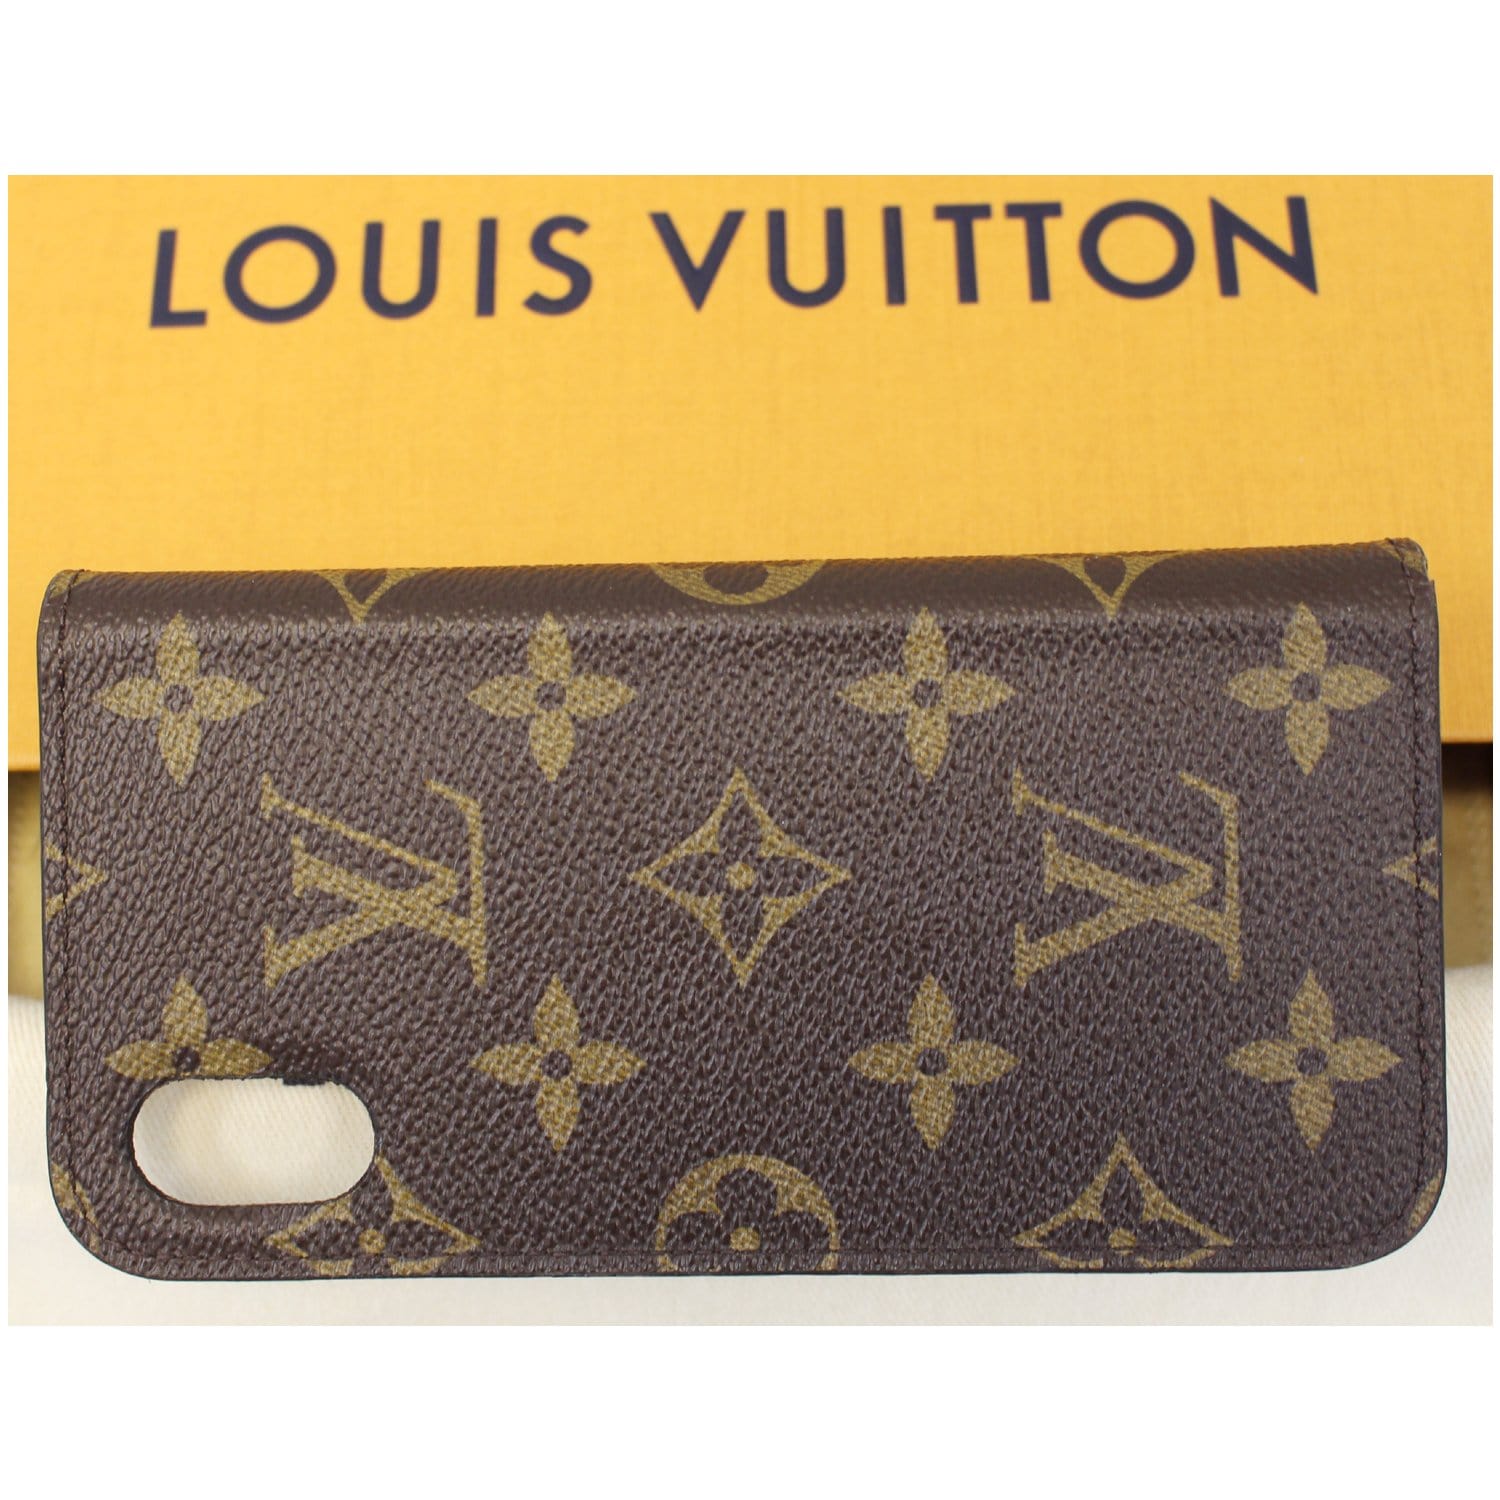 Sold at Auction: Genuine Louis Vuitton folio phone case for iPhone